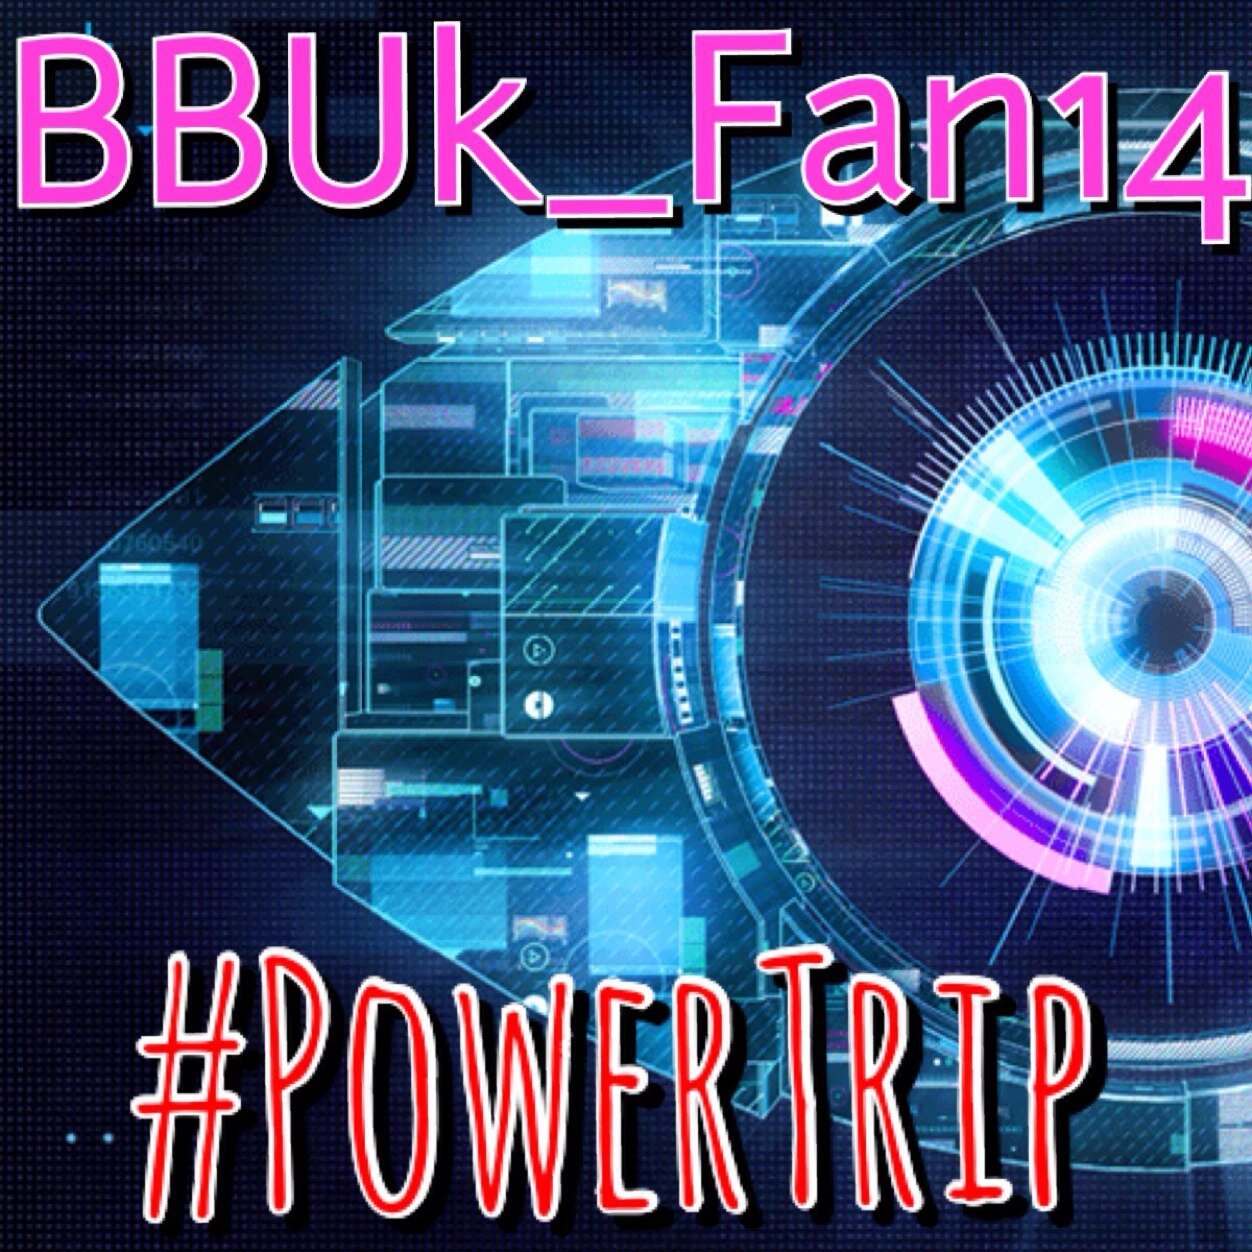 *WARNING* 

I tweet a lot about all things BB! I'm a superfan! 

#BBUK #BBPowerTrip